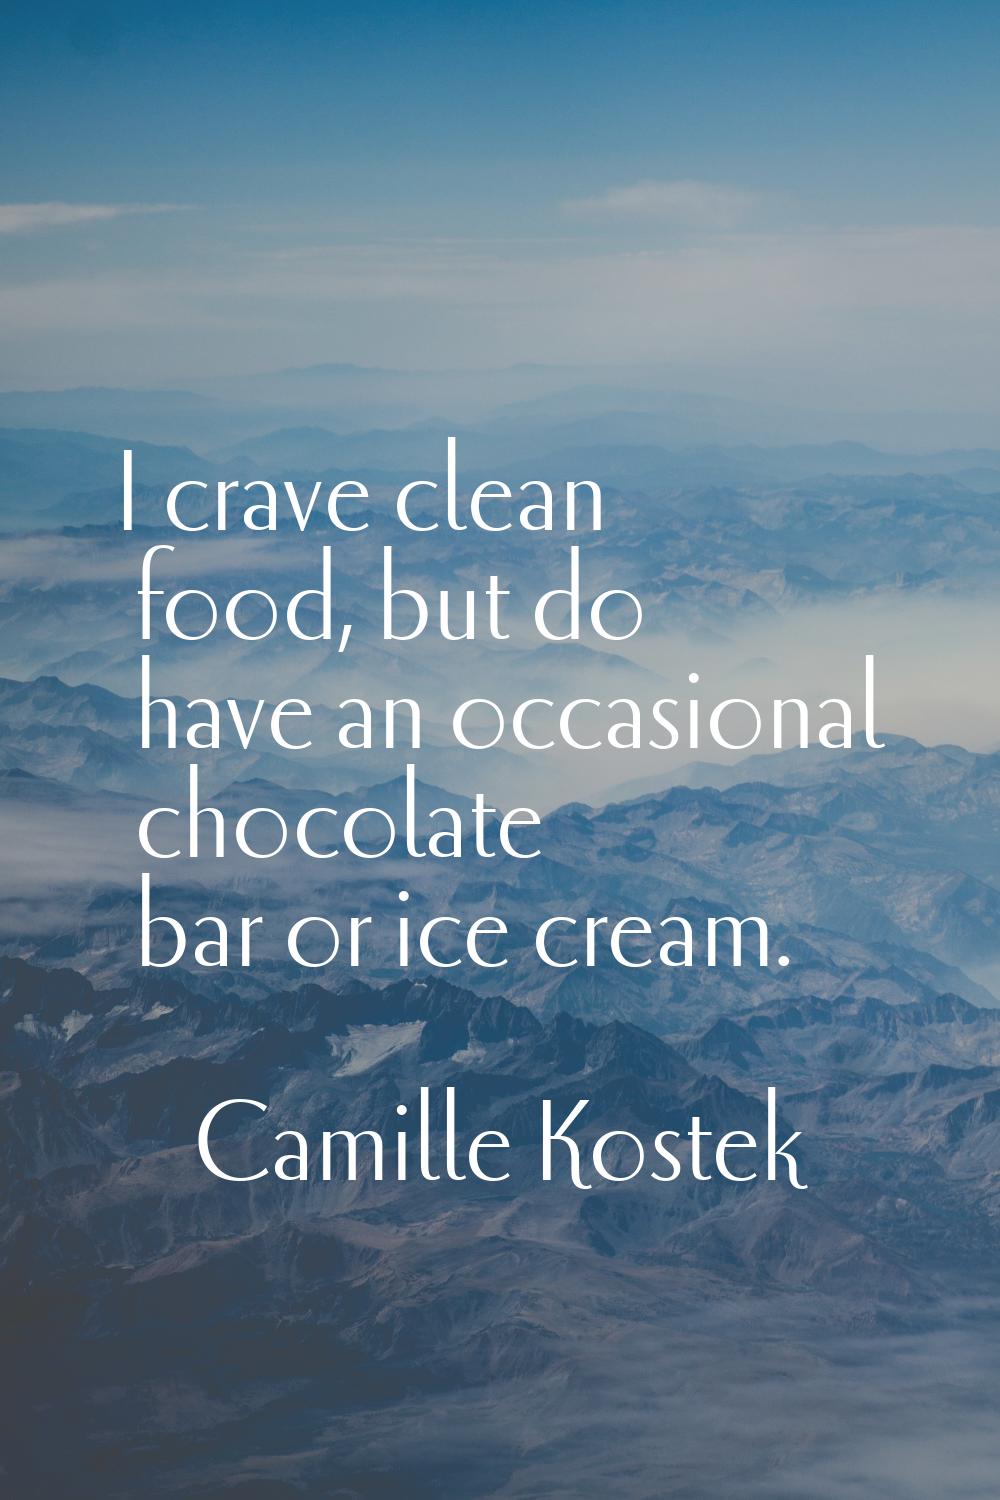 I crave clean food, but do have an occasional chocolate bar or ice cream.